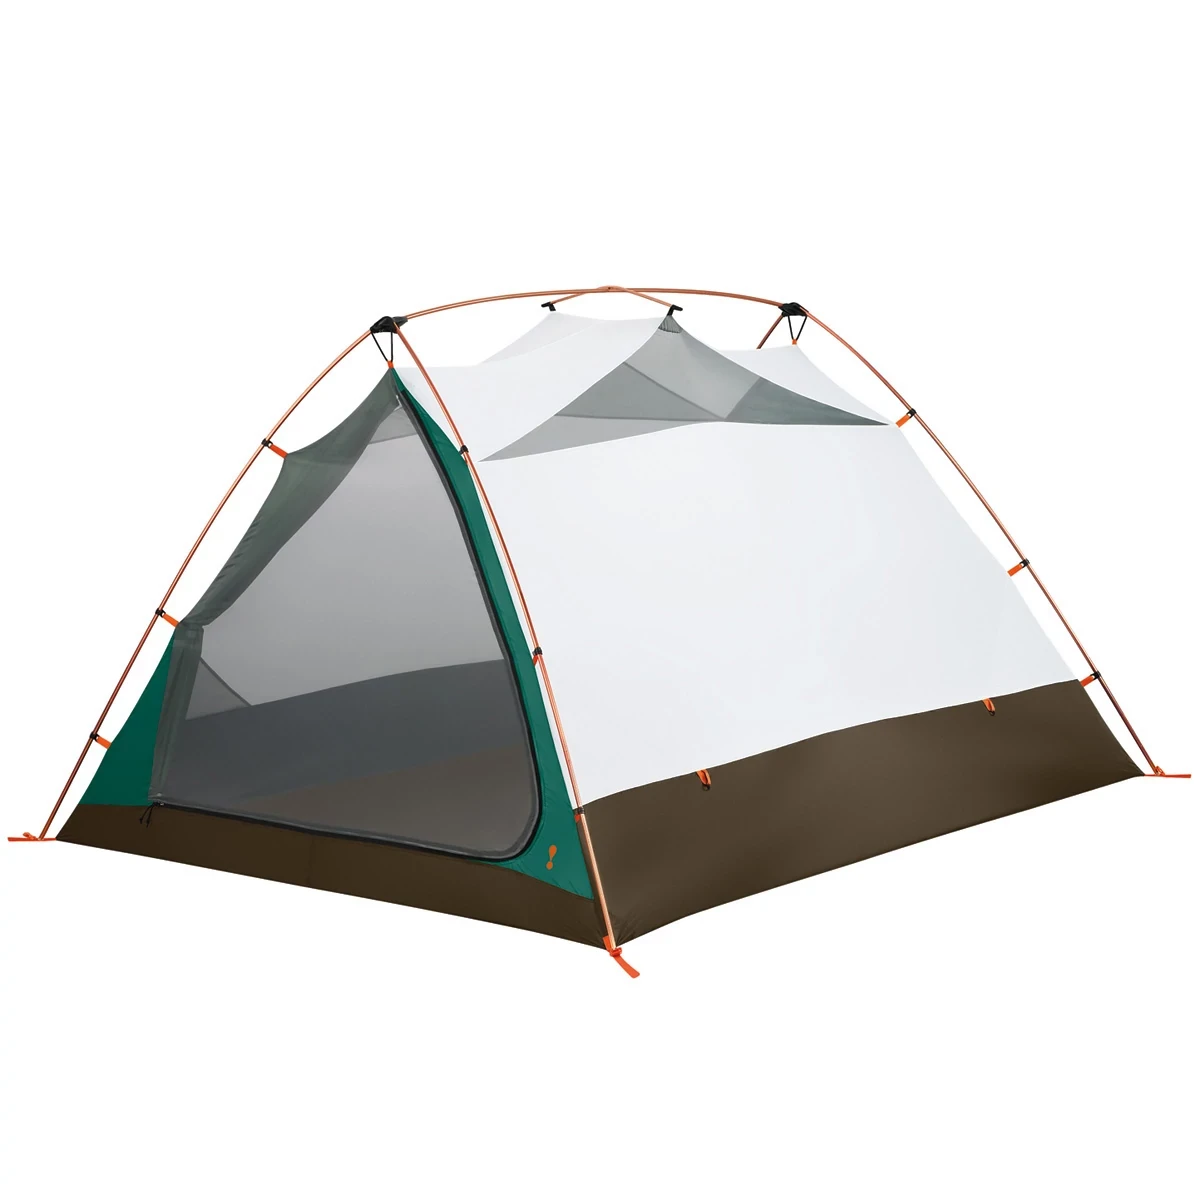 Timberline SQ Outfitter 4 person tent without rain fly